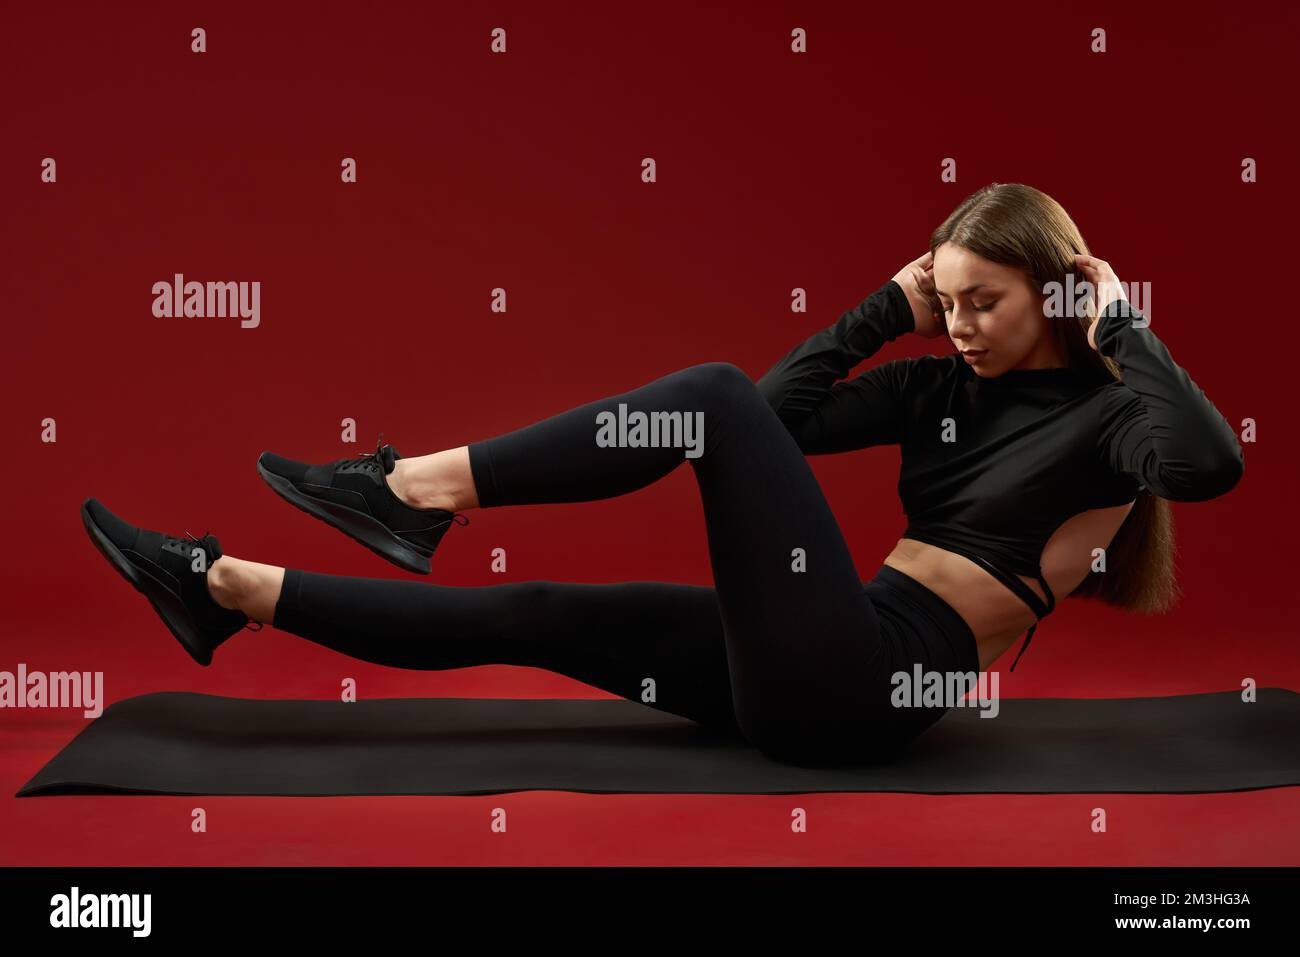 Pretty brunette woman trainer doing twists and abs sitting on yoga mat. Female in black sports suite training cross fit exercise on red studio background. Concept of cardio training. Stock Photo